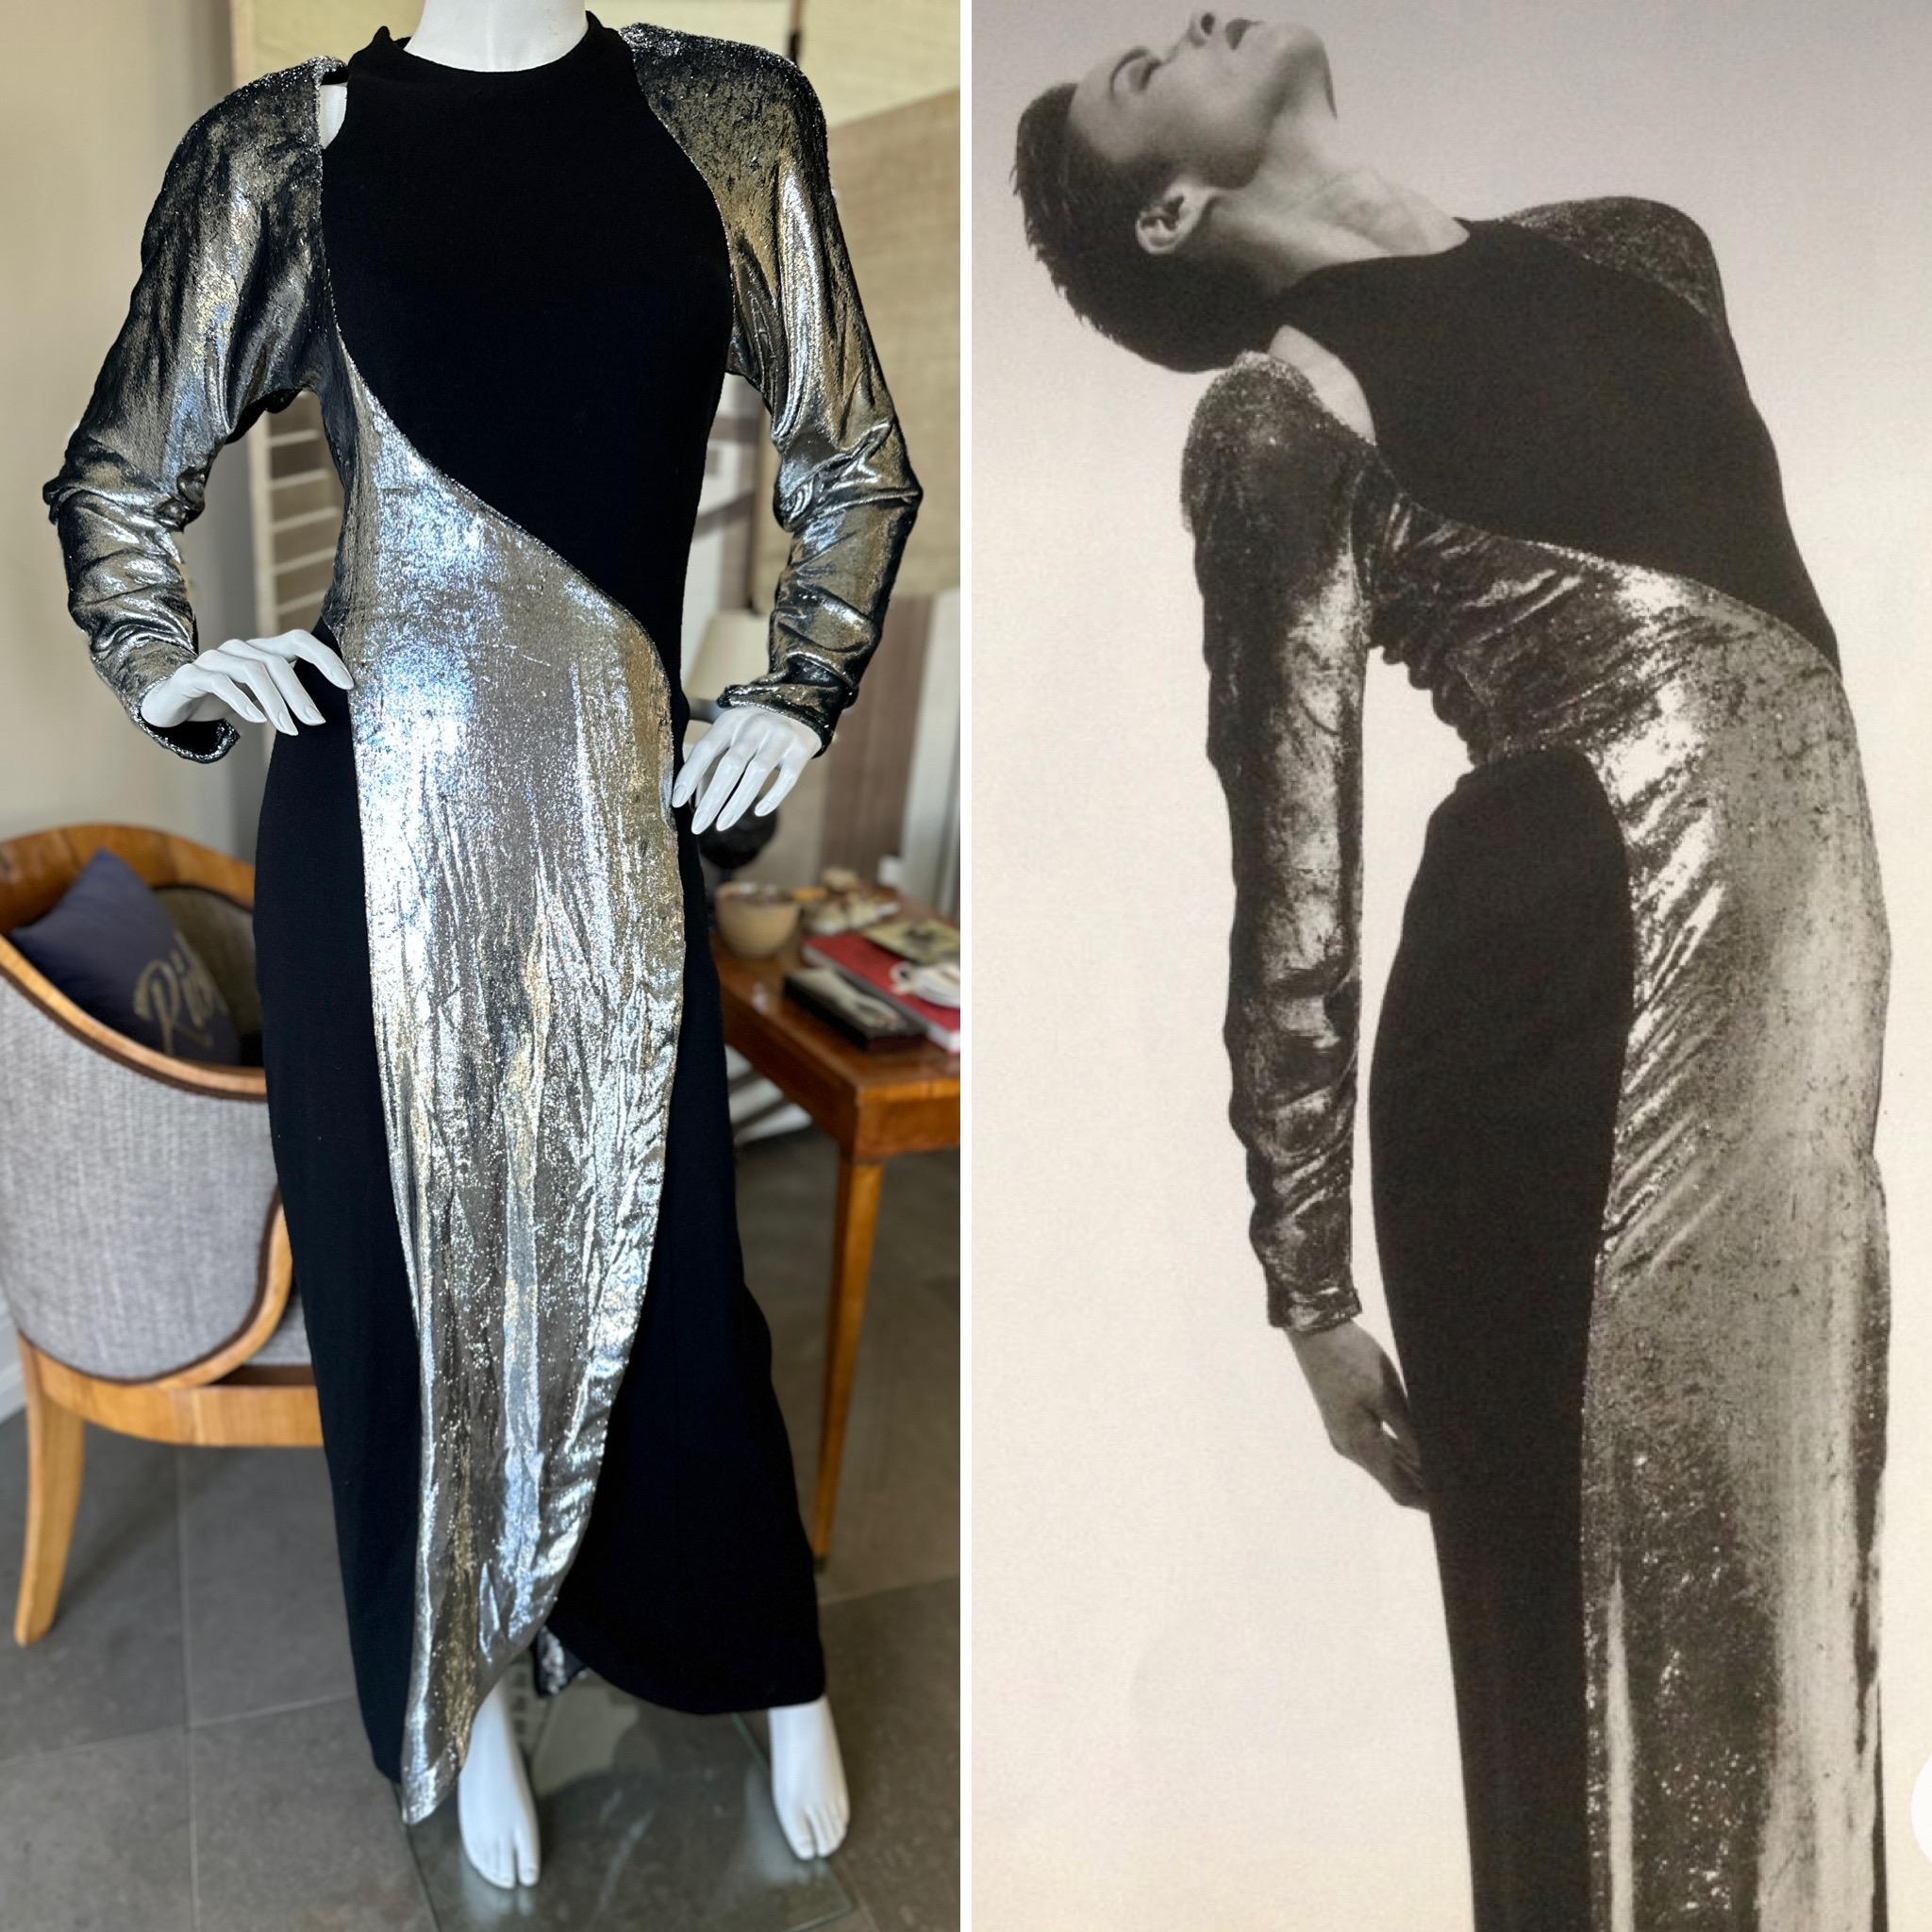 Geoffrey Beene Fall 1986 Silver Panne Velvet Jersey Evening Dress in Met Museum.
This is so special, the silver panne velvet is really unusual

From the Met about this dress;
